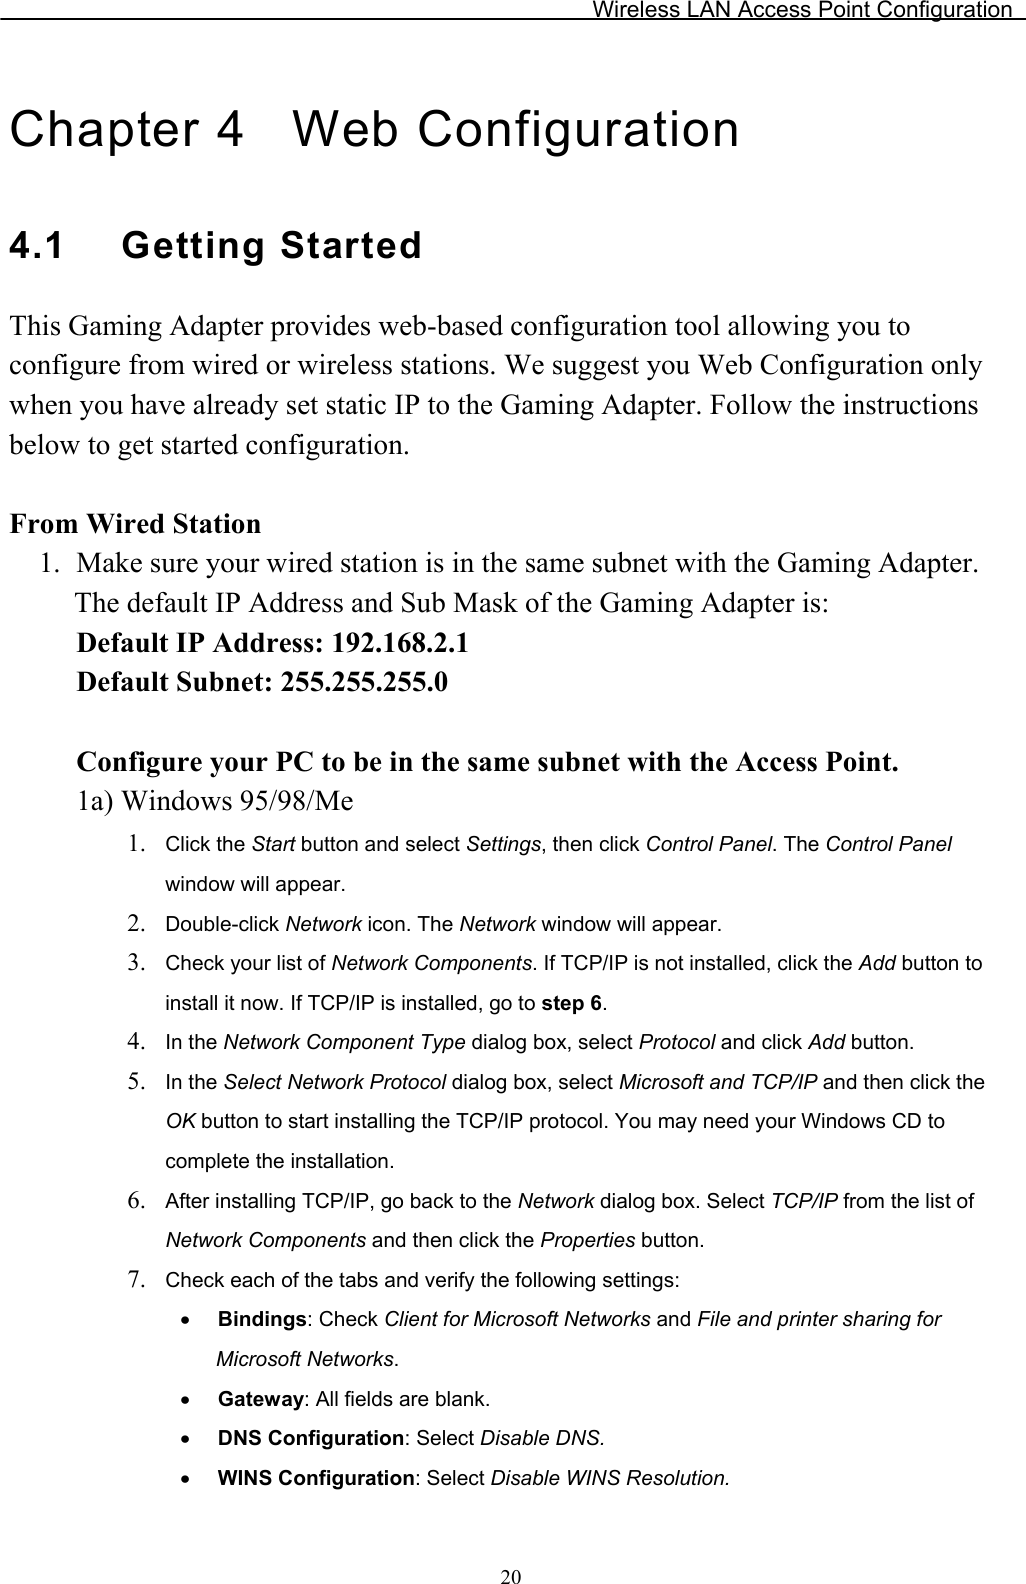 Wireless LAN Access Point Configuration Chapter 4  Web Configuration 4.1 Getting StartedThis Gaming Adapter provides web-based configuration tool allowing you to configure from wired or wireless stations. We suggest you Web Configuration only when you have already set static IP to the Gaming Adapter. Follow the instructions below to get started configuration. From Wired Station 1. Make sure your wired station is in the same subnet with the Gaming Adapter.The default IP Address and Sub Mask of the Gaming Adapter is: Default IP Address: 192.168.2.1 Default Subnet: 255.255.255.0 Configure your PC to be in the same subnet with the Access Point.1a) Windows 95/98/Me 1. Click the Start button and select Settings, then click Control Panel. The Control Panelwindow will appear. 2. Double-click Network icon. The Network window will appear. 3. Check your list of Network Components. If TCP/IP is not installed, click the Add button to install it now. If TCP/IP is installed, go to step 6.4. In the Network Component Type dialog box, select Protocol and click Add button.5. In the Select Network Protocol dialog box, select Microsoft and TCP/IP and then click the OK button to start installing the TCP/IP protocol. You may need your Windows CD to complete the installation. 6. After installing TCP/IP, go back to the Network dialog box. Select TCP/IP from the list ofNetwork Components and then click the Properties button. 7. Check each of the tabs and verify the following settings: x Bindings: Check Client for Microsoft Networks and File and printer sharing for Microsoft Networks.x Gateway: All fields are blank.x DNS Configuration: Select Disable DNS.x WINS Configuration: Select Disable WINS Resolution.20